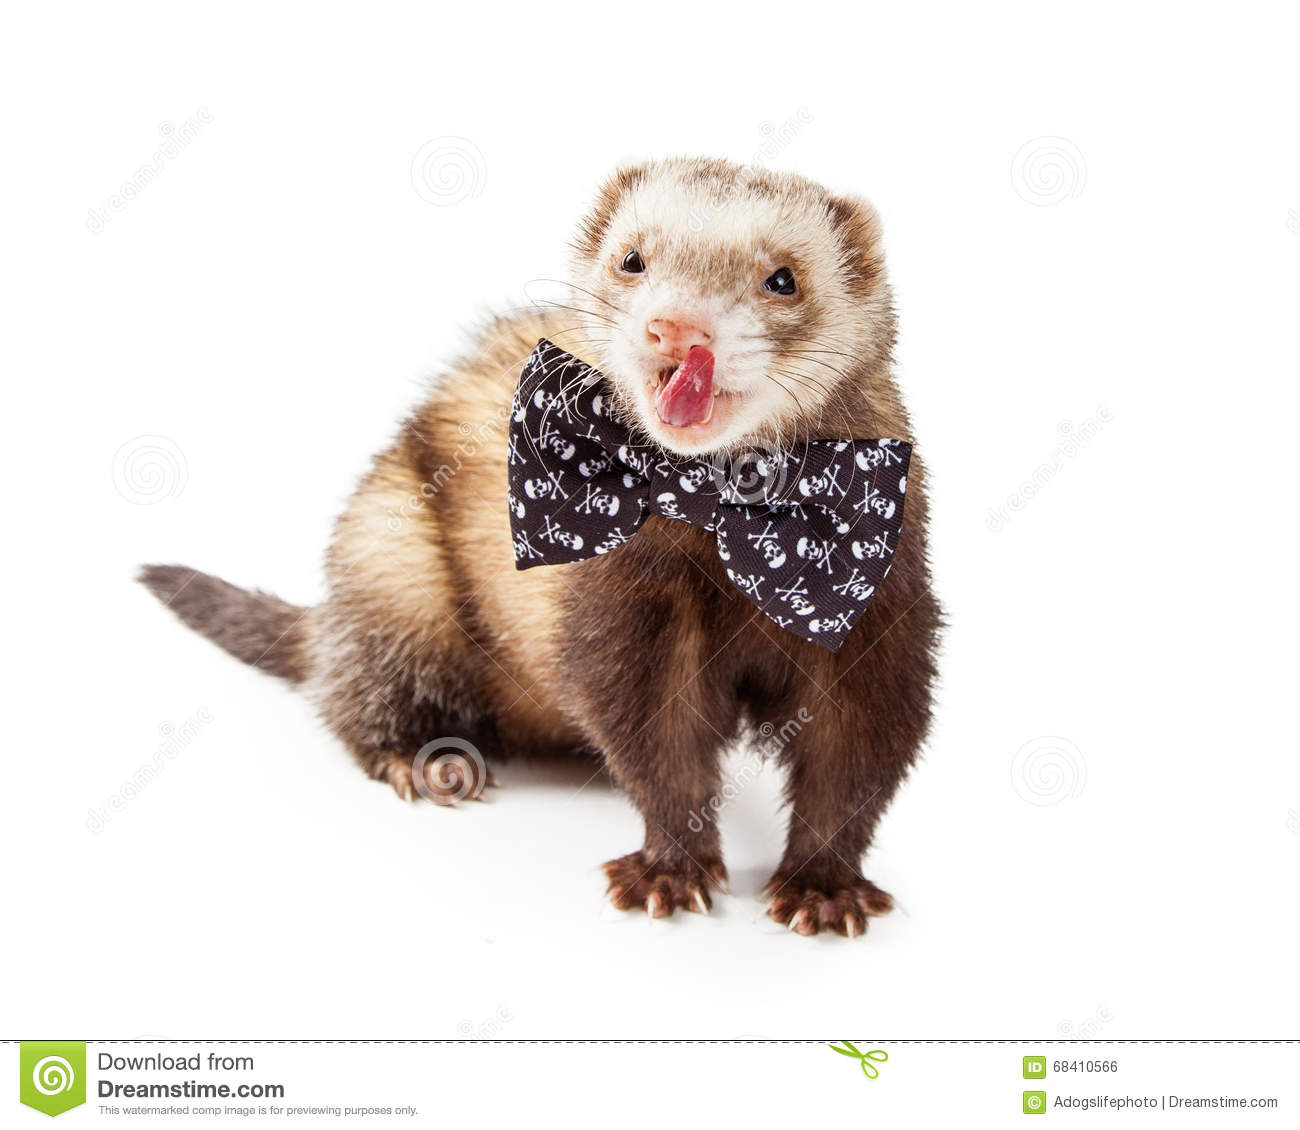 ferret wearing bow tie - c om m 2 T Px led dream azime D 68410566 Download from Dreamstime.com This watermarked comp image is for previewing purposes only. Adogslifephoto | Dreamstime.com